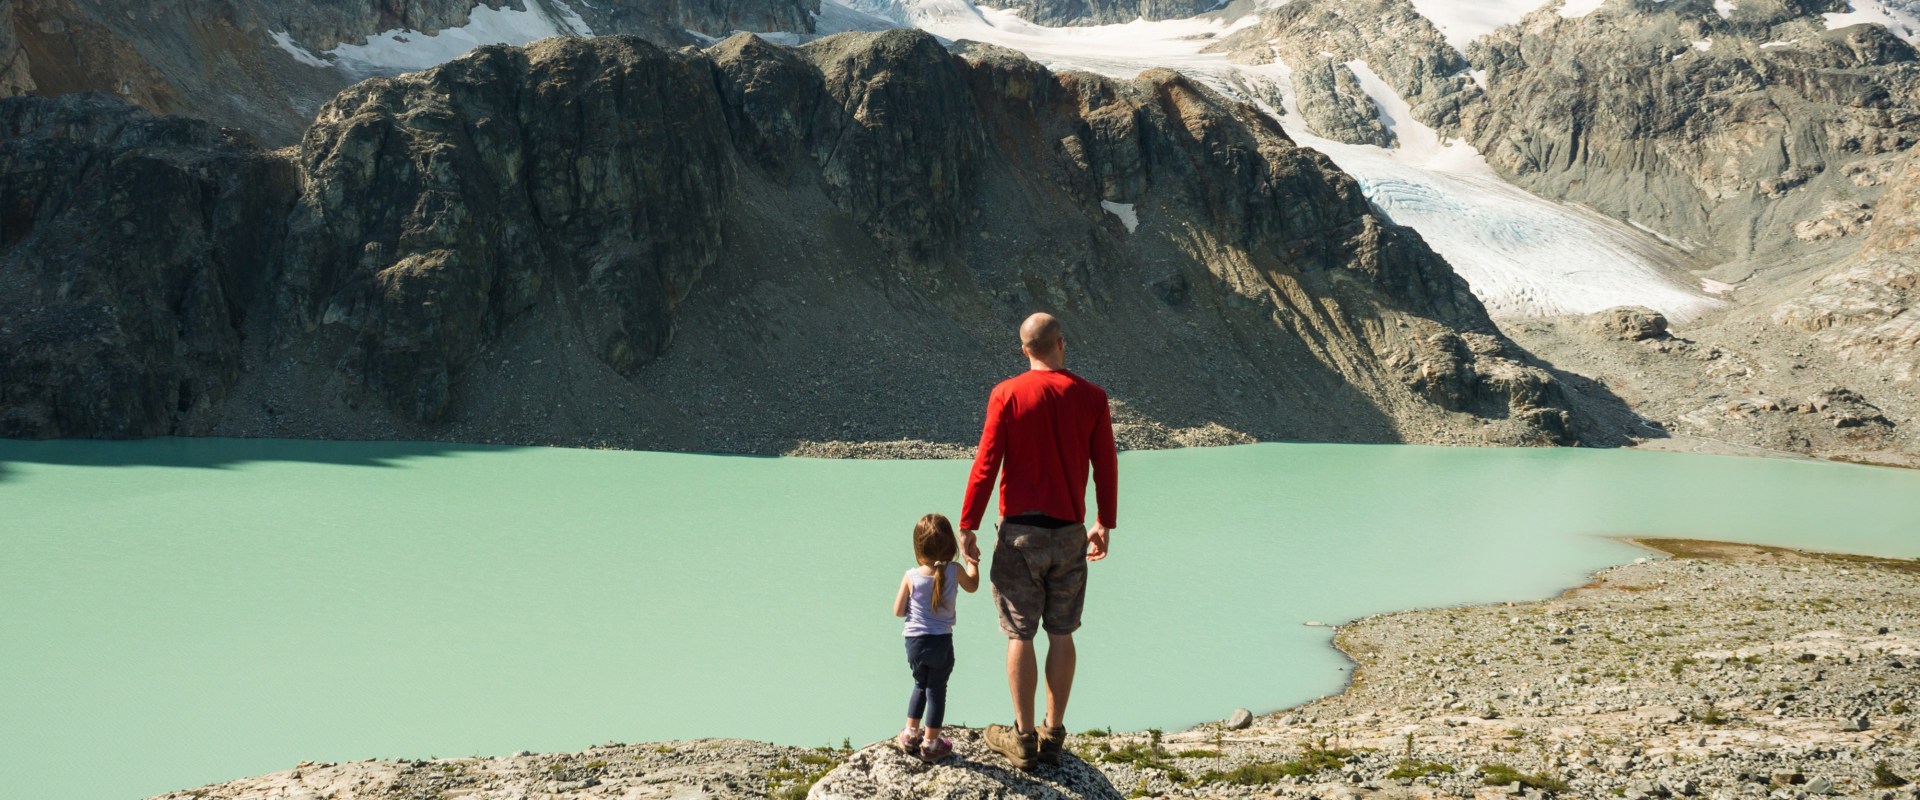 Family-Friendly Mountain Getaways: Your Ultimate Guide to the Best Vacations